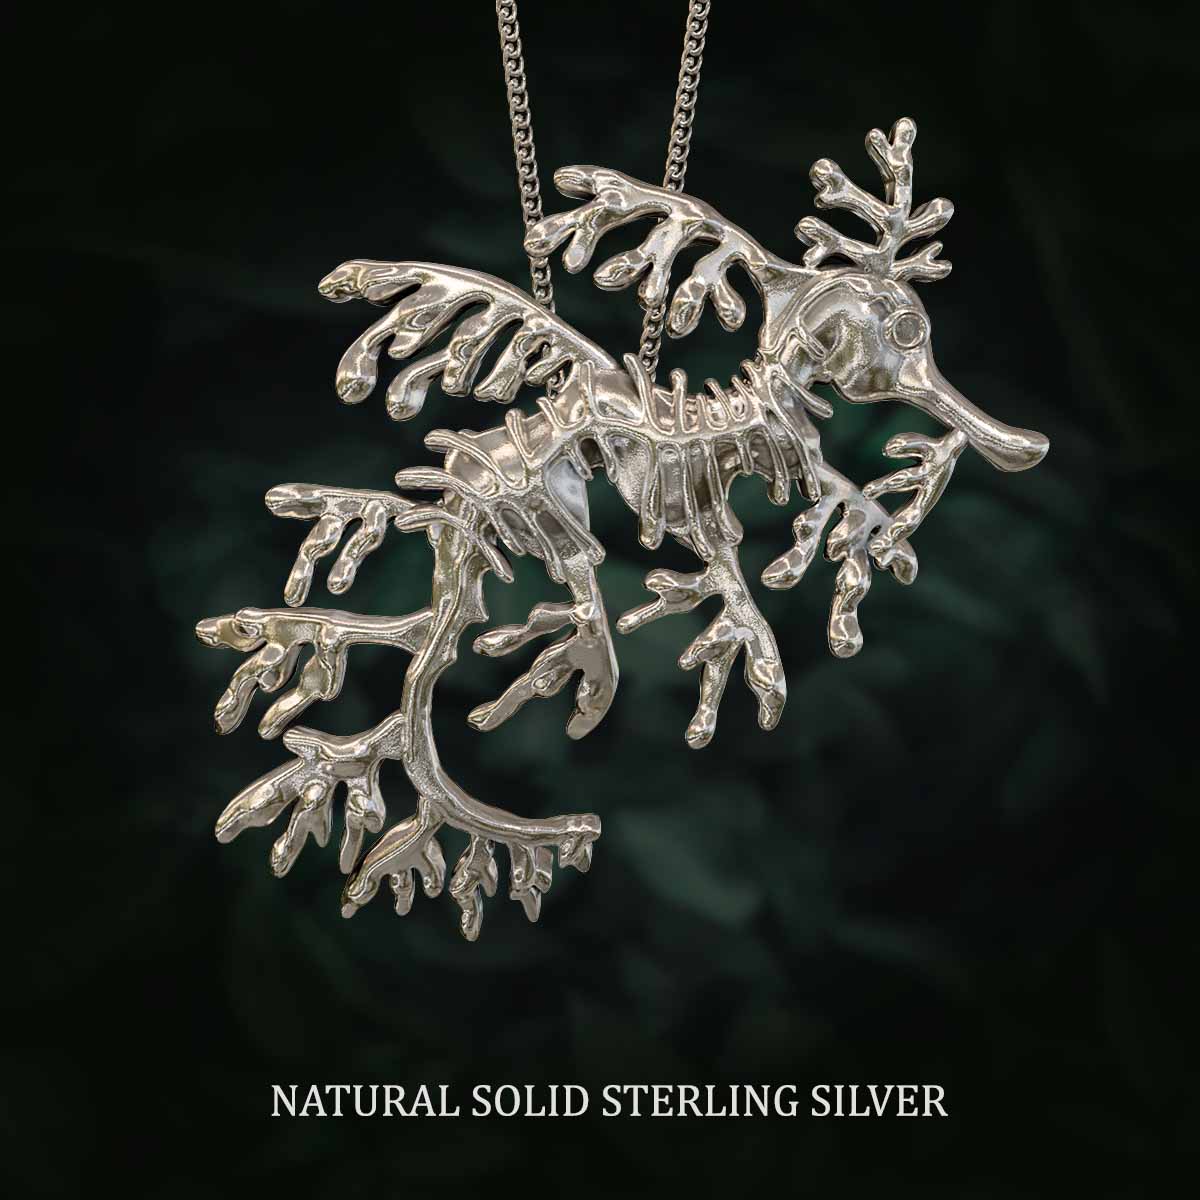 Natural-Satin-Polish-Solid-Sterling-Silver-Leafy-Sea-Dragon-Pendant-Jewelry-For-Necklace